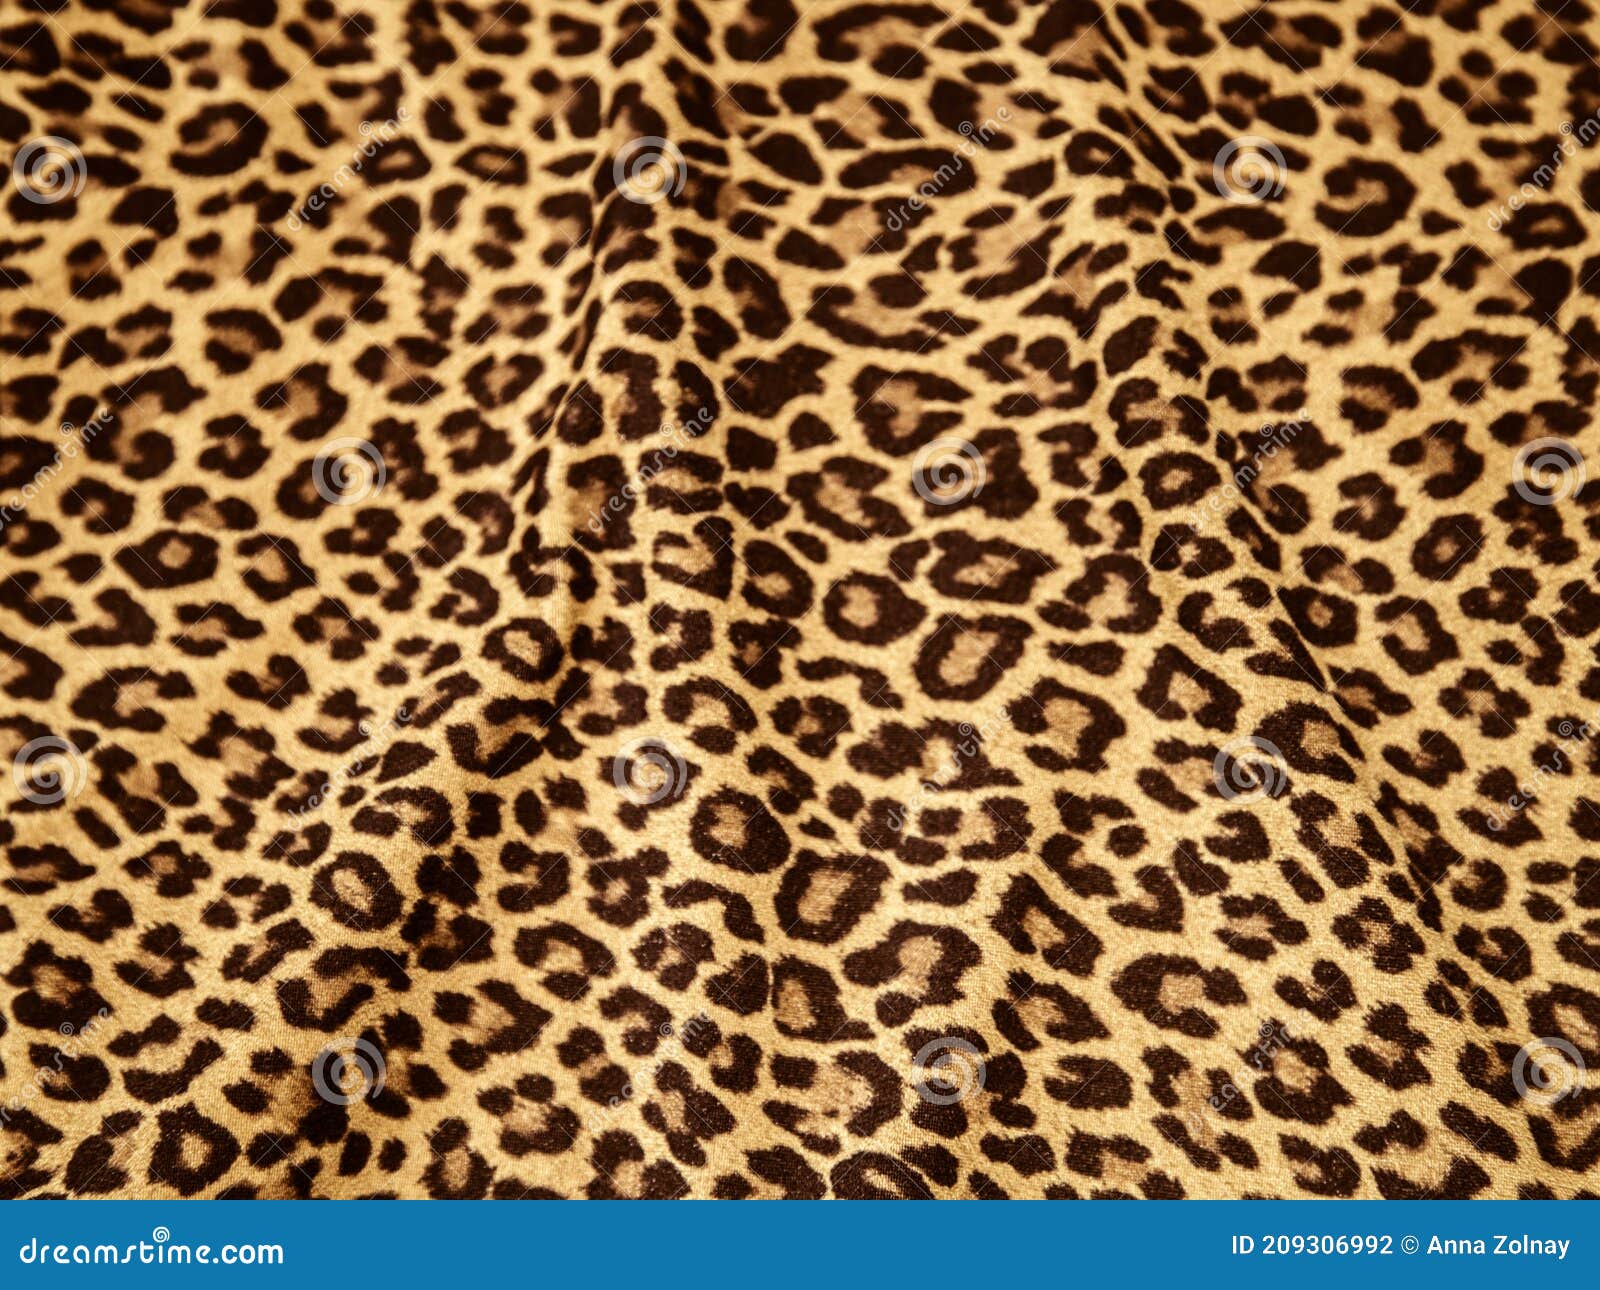 Leopard Print Picture, Leopard Print Image, Cloth Pattern Texture. Stock  Photo - Image of graphic, cheetah: 209306992